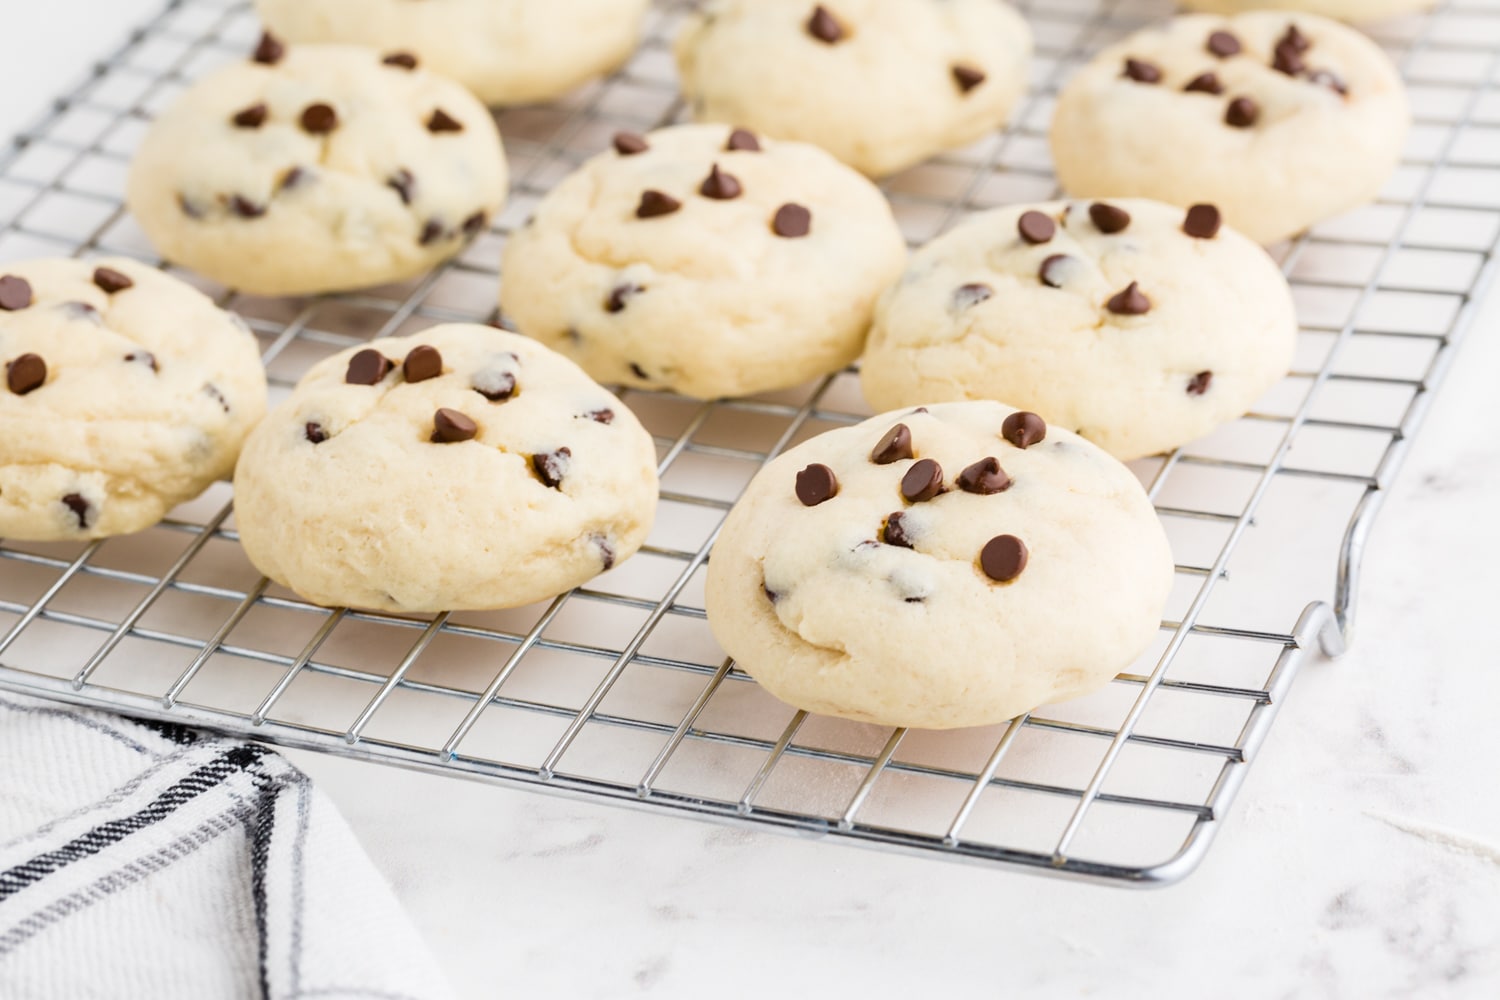 Chocolate Chip Cheesecake Cookies on a cooling rack on a marble countertop, striped kitchen linen